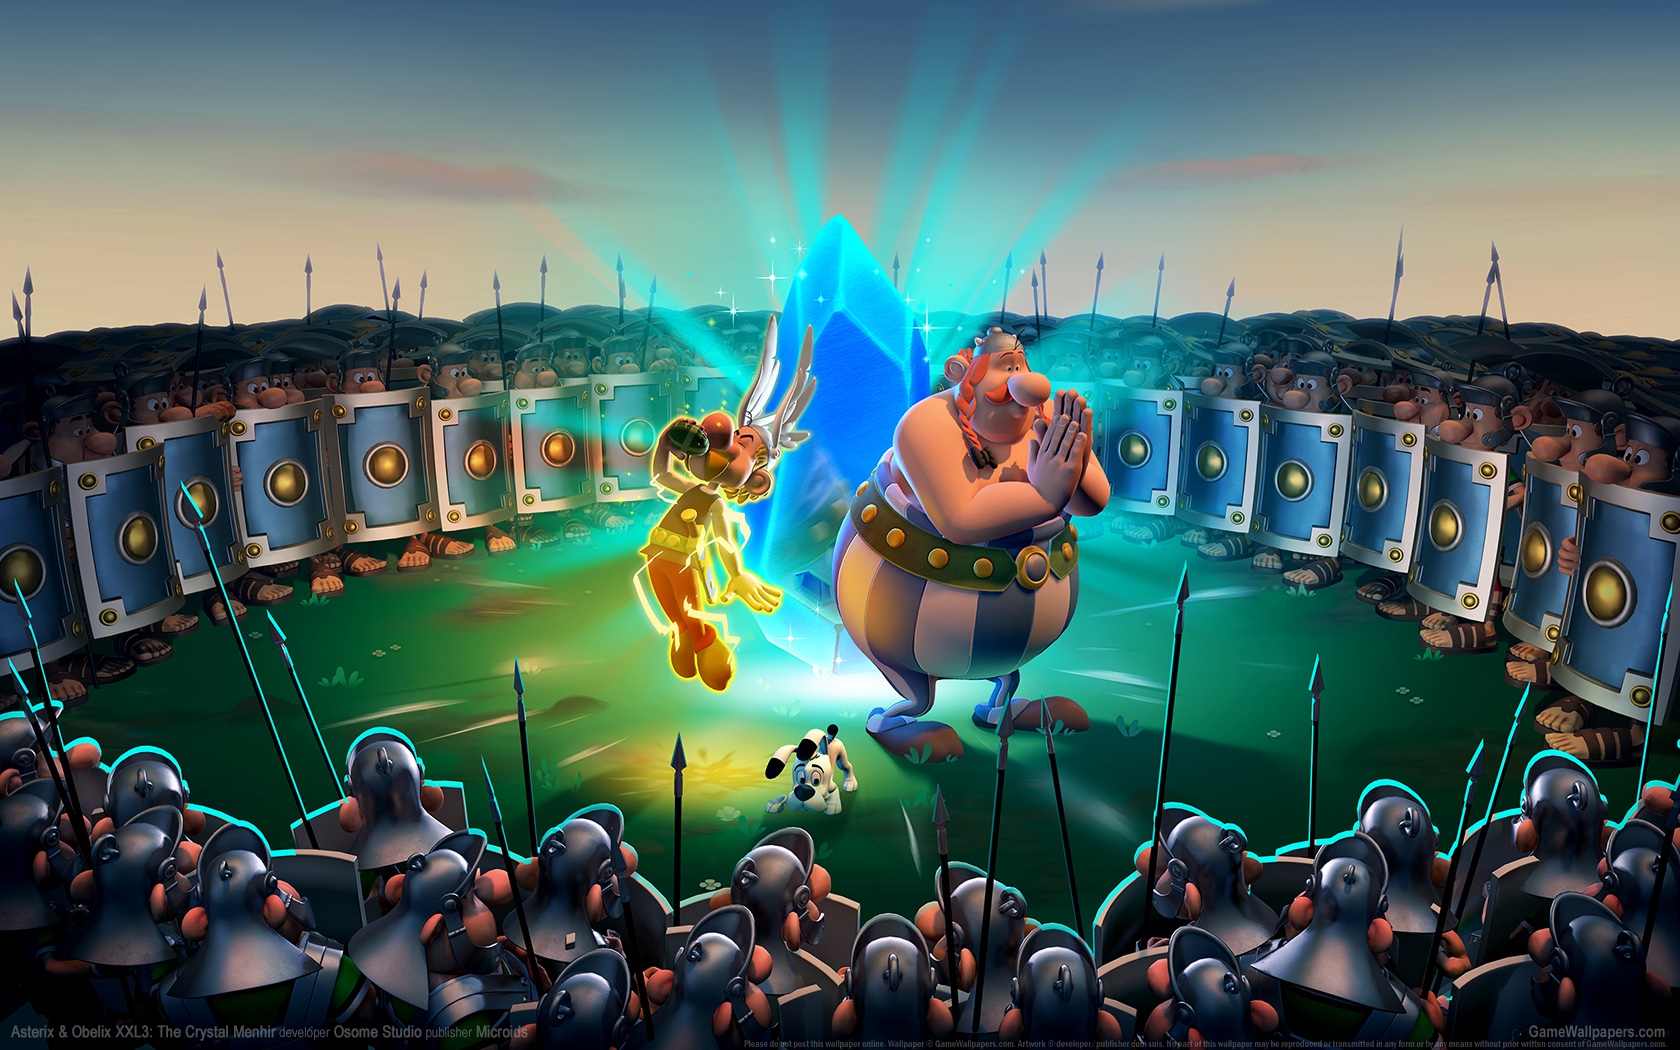 Asterix & Obelix XXL3: The Crystal Menhir 1680x1050 wallpaper or background 01